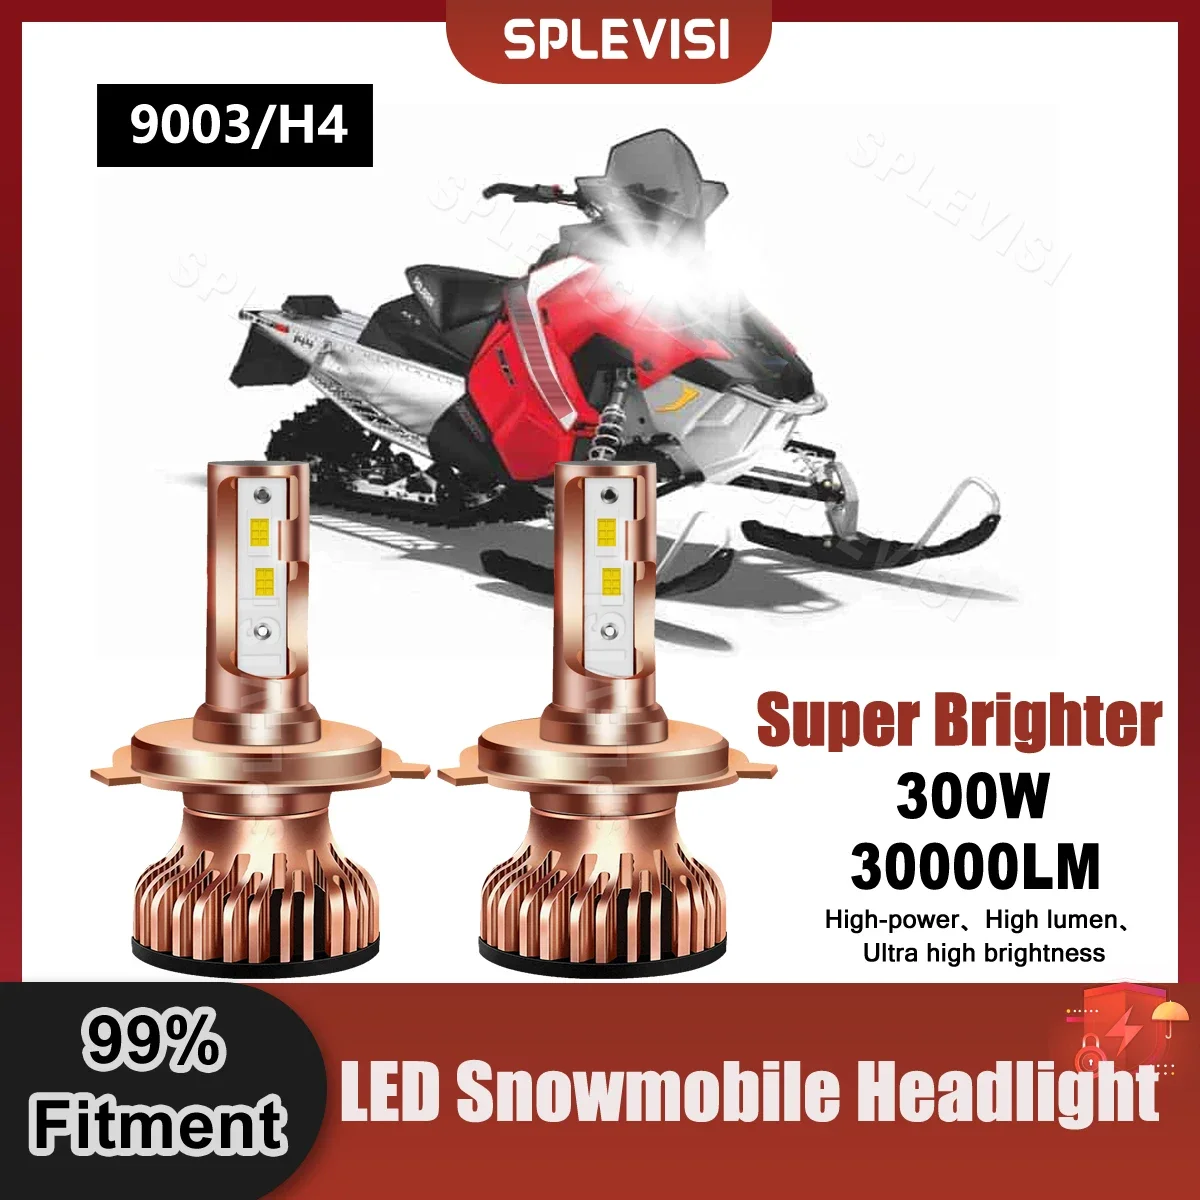 SPLEVISI LED Headlight Bulbs 6000K Pure White 300W For Polaris Switch Back 800 2009 2010 2011 2012 2013 2014 Motorcycle Bulbs plug and play led headlight bulbs 6000k 300w 9v 24v for ski doo renegade sport 600 2011 2012 2013 2014 2015 2016 2017 2018